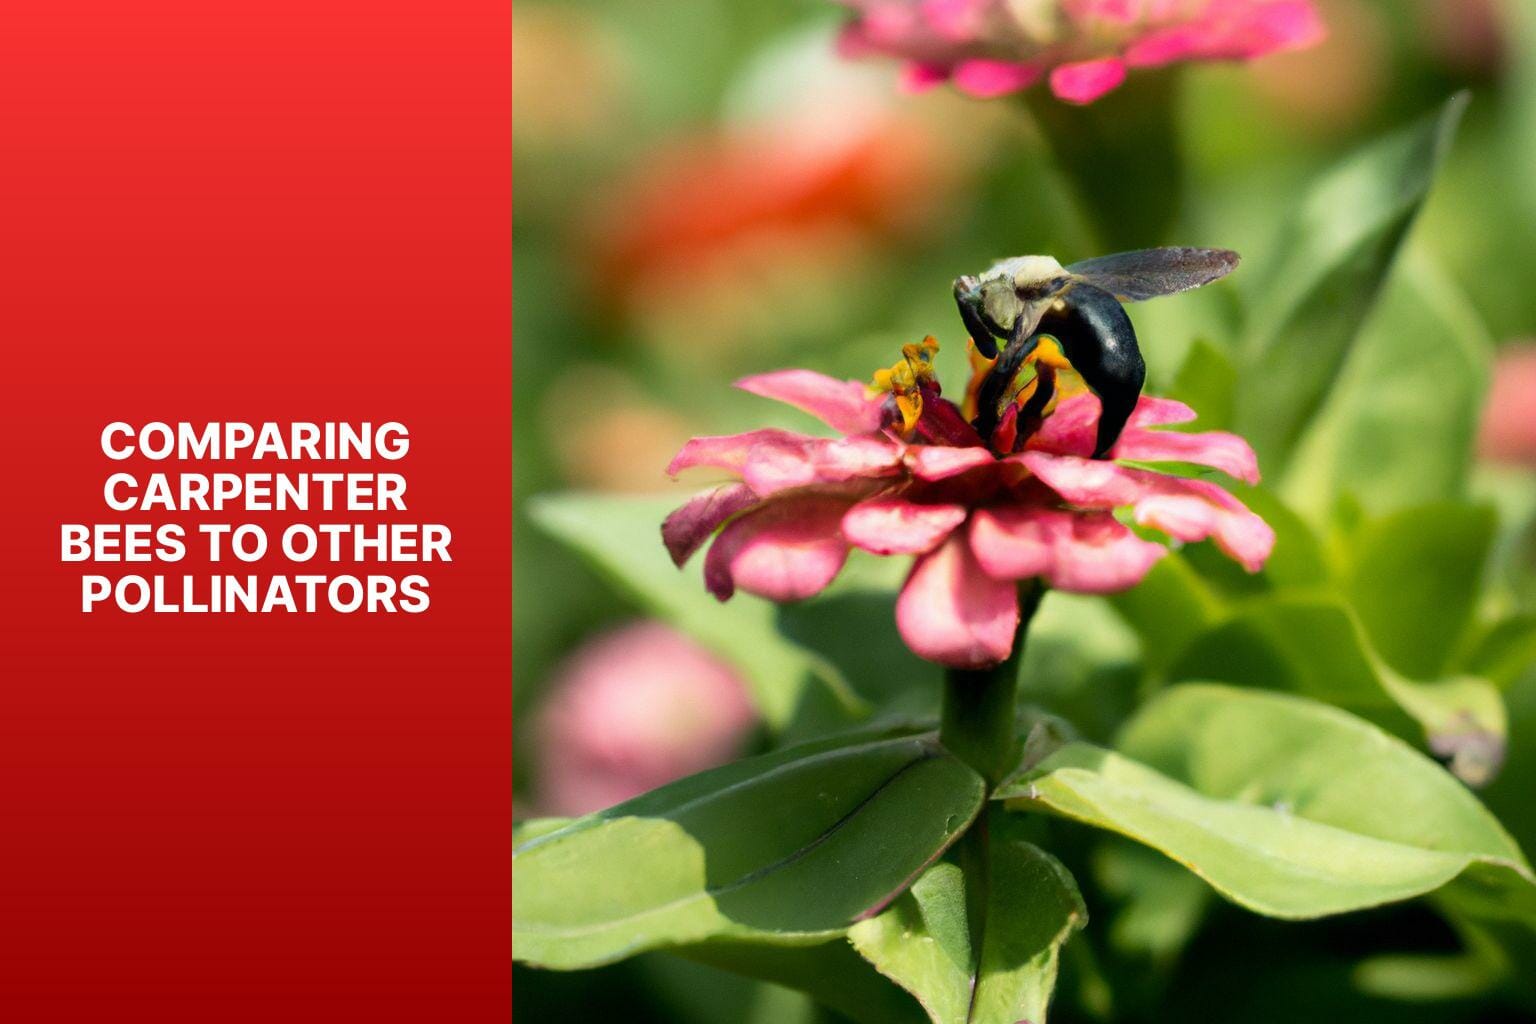 Comparing Carpenter Bees to Other Pollinators - do carpenter bees pollinate 